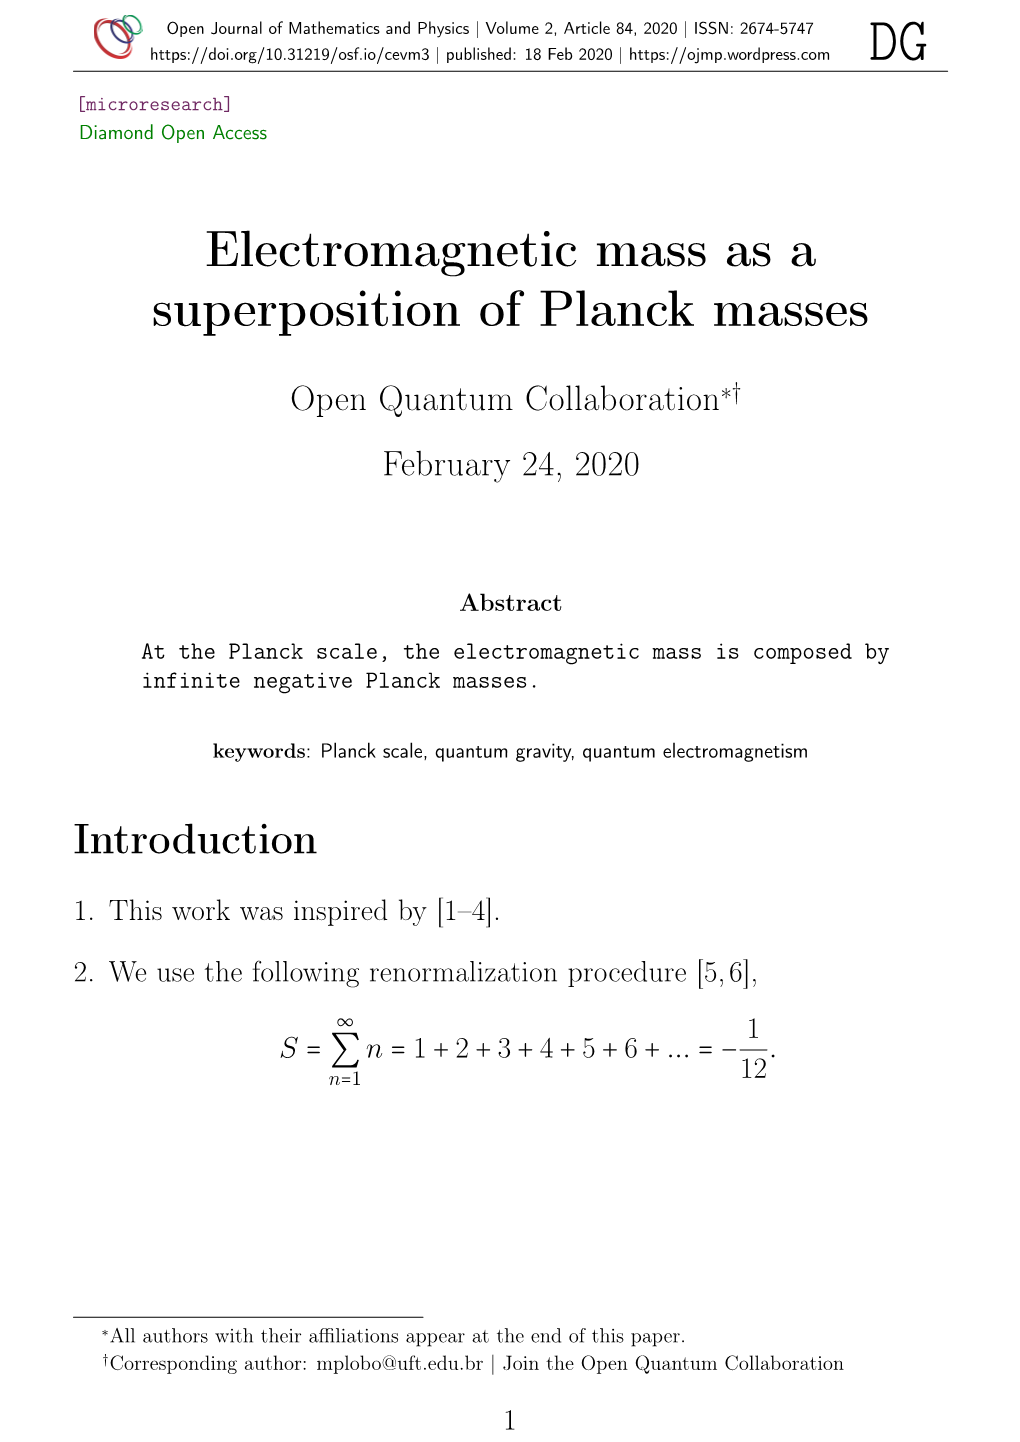 Electromagnetic Mass As a Superposition of Planck Masses